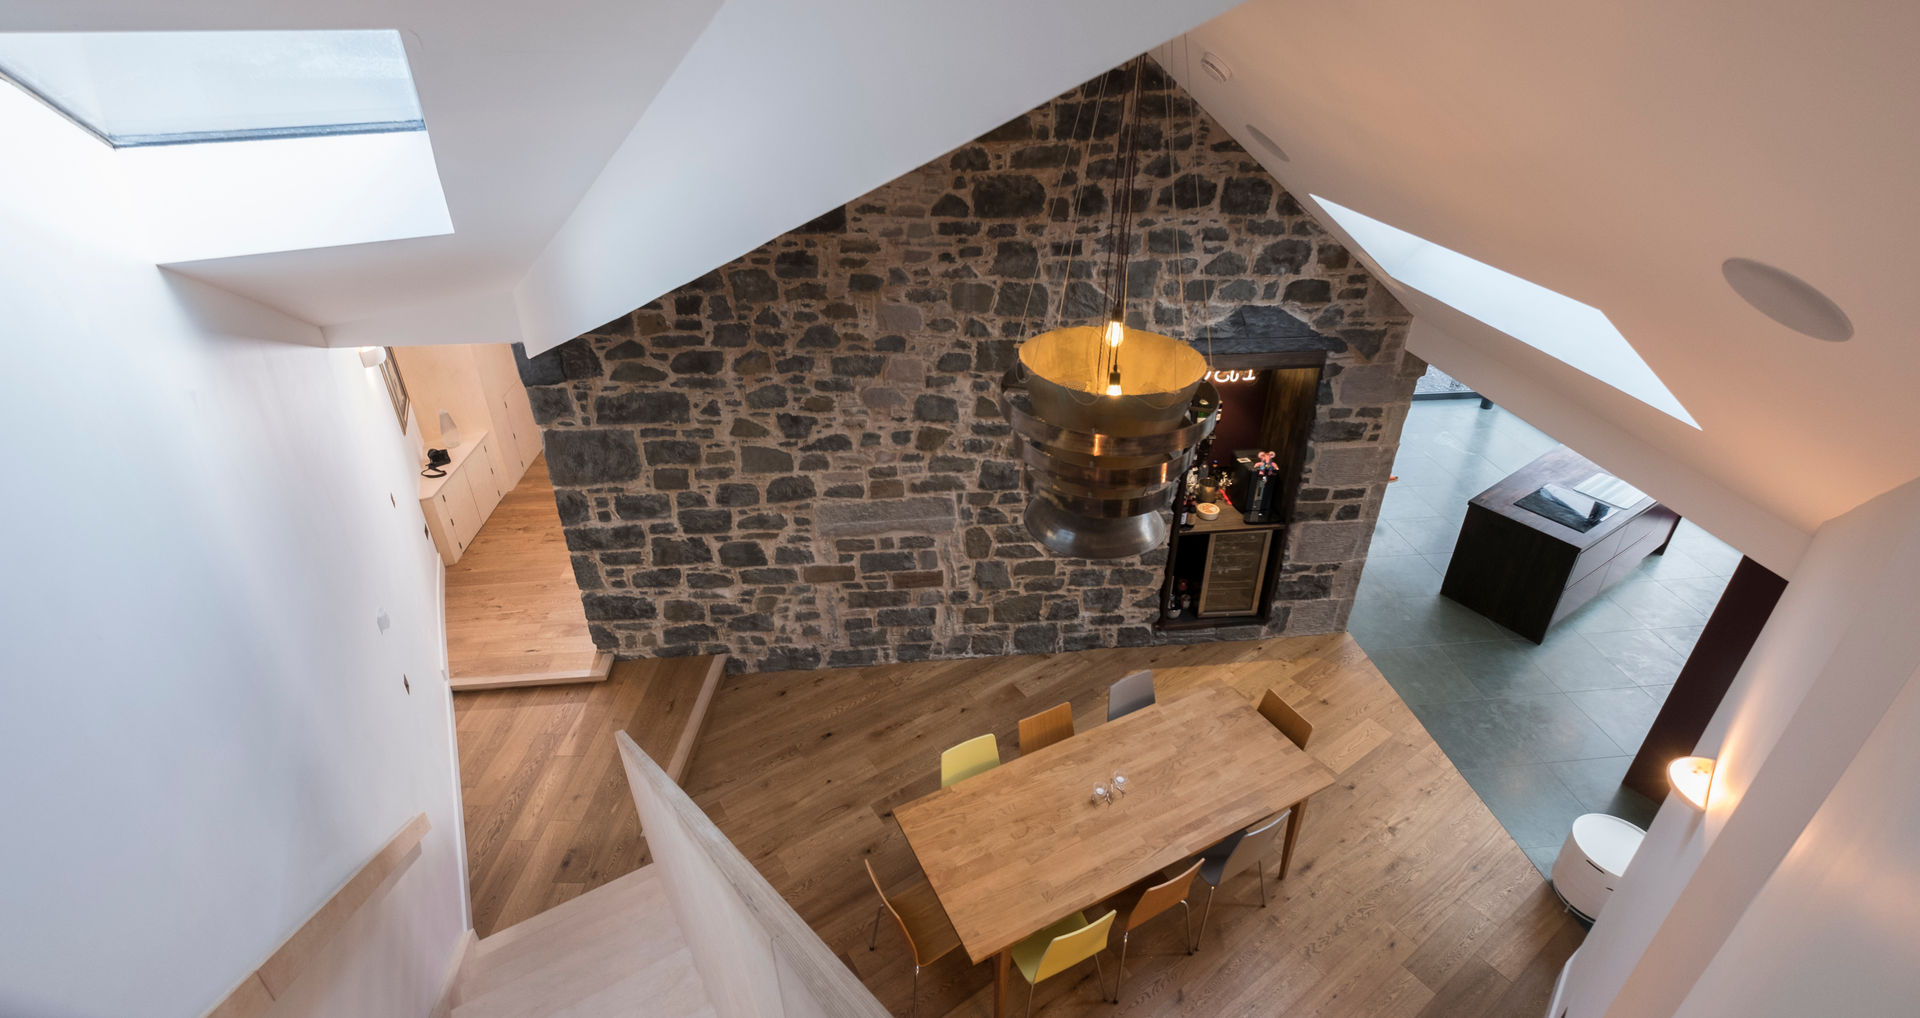 View from staircase over the dining room Woodside Parker Kirk Architects Столовая комната в стиле модерн Камень Rooflight,Bespoke,Staircase,Plywood,Reclaimed,Lighting,Dining room,Stone wall,Original features,wood flooring